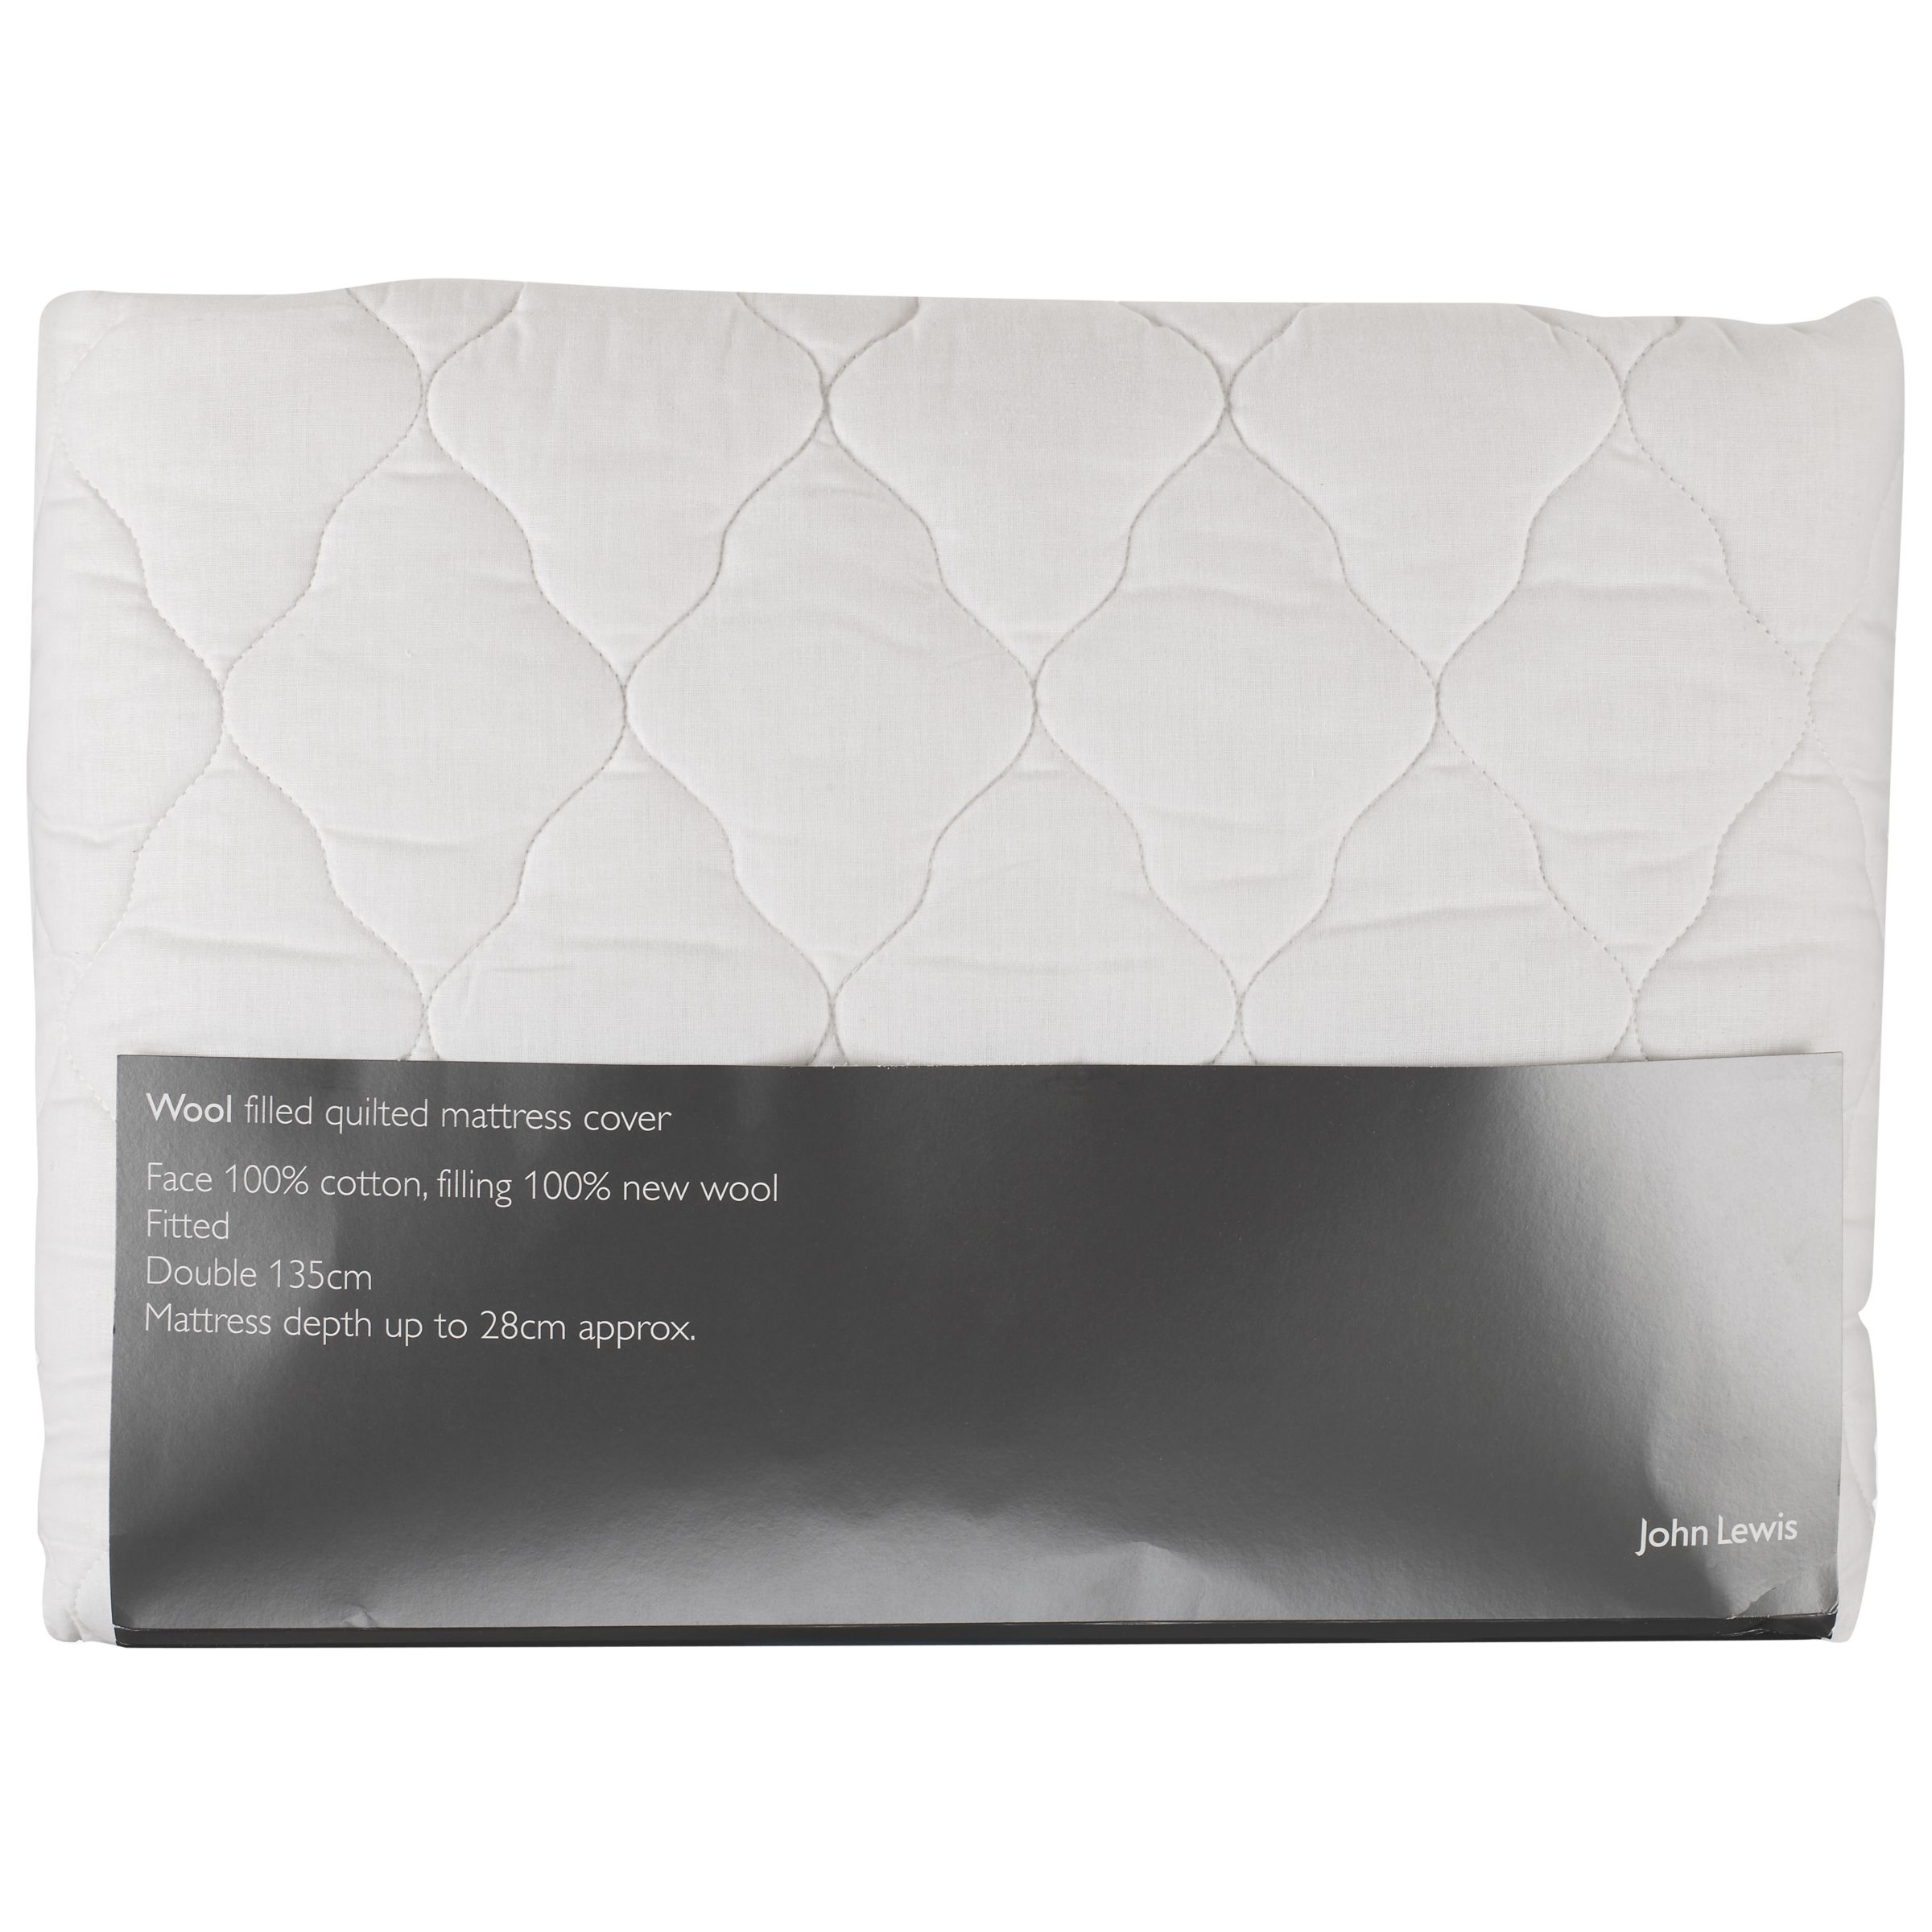 John Lewis Wool Filled Quilted Mattress Protector, Double